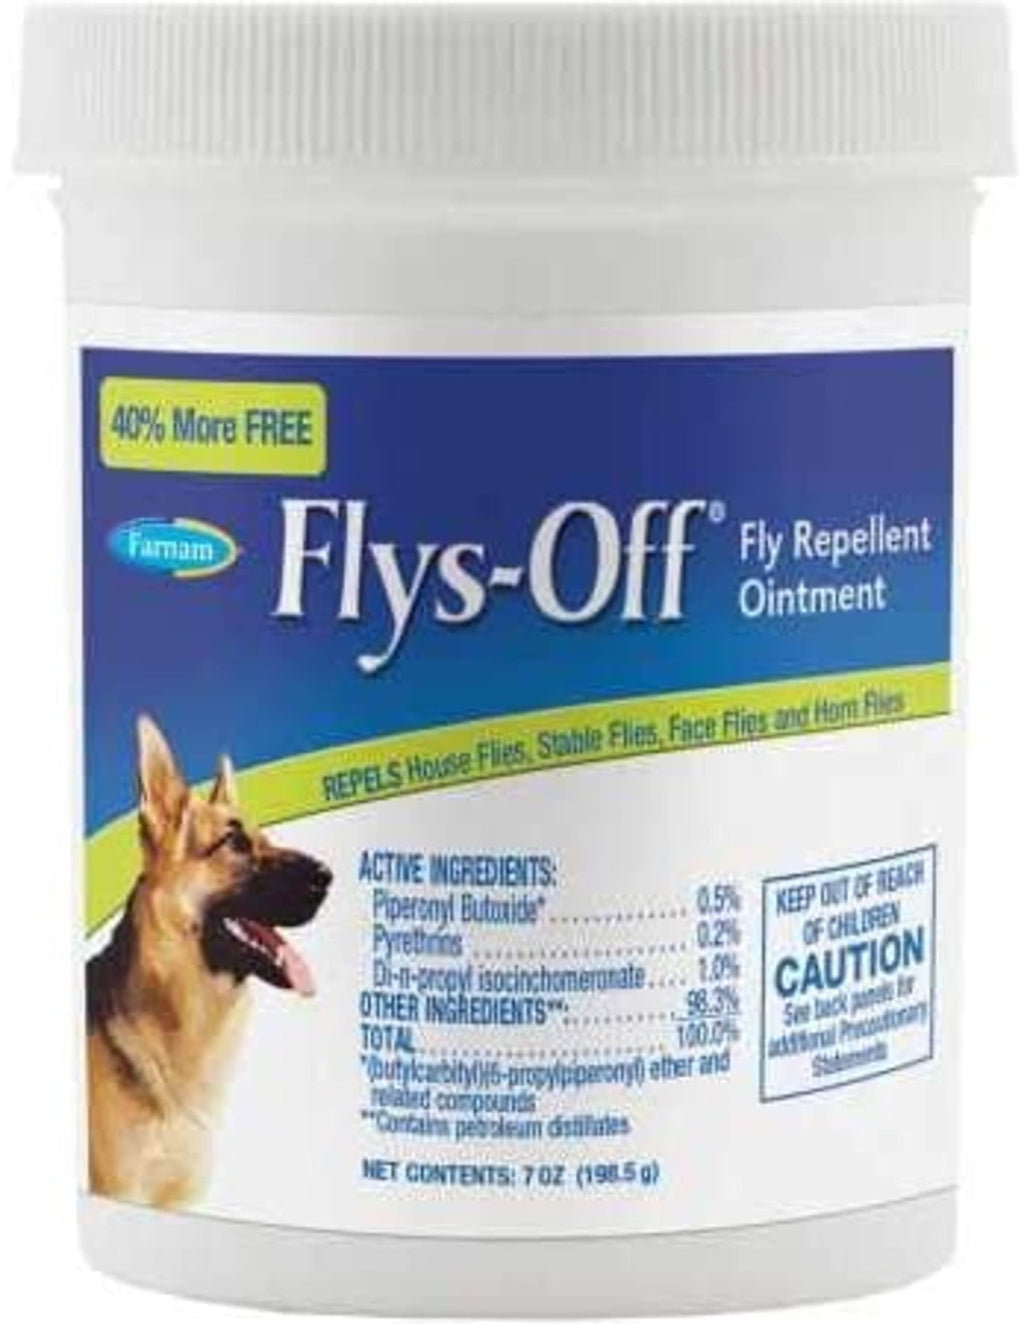 Farnam Flys-Off Insect Repellent Ointment for Dogs - 7 Oz  